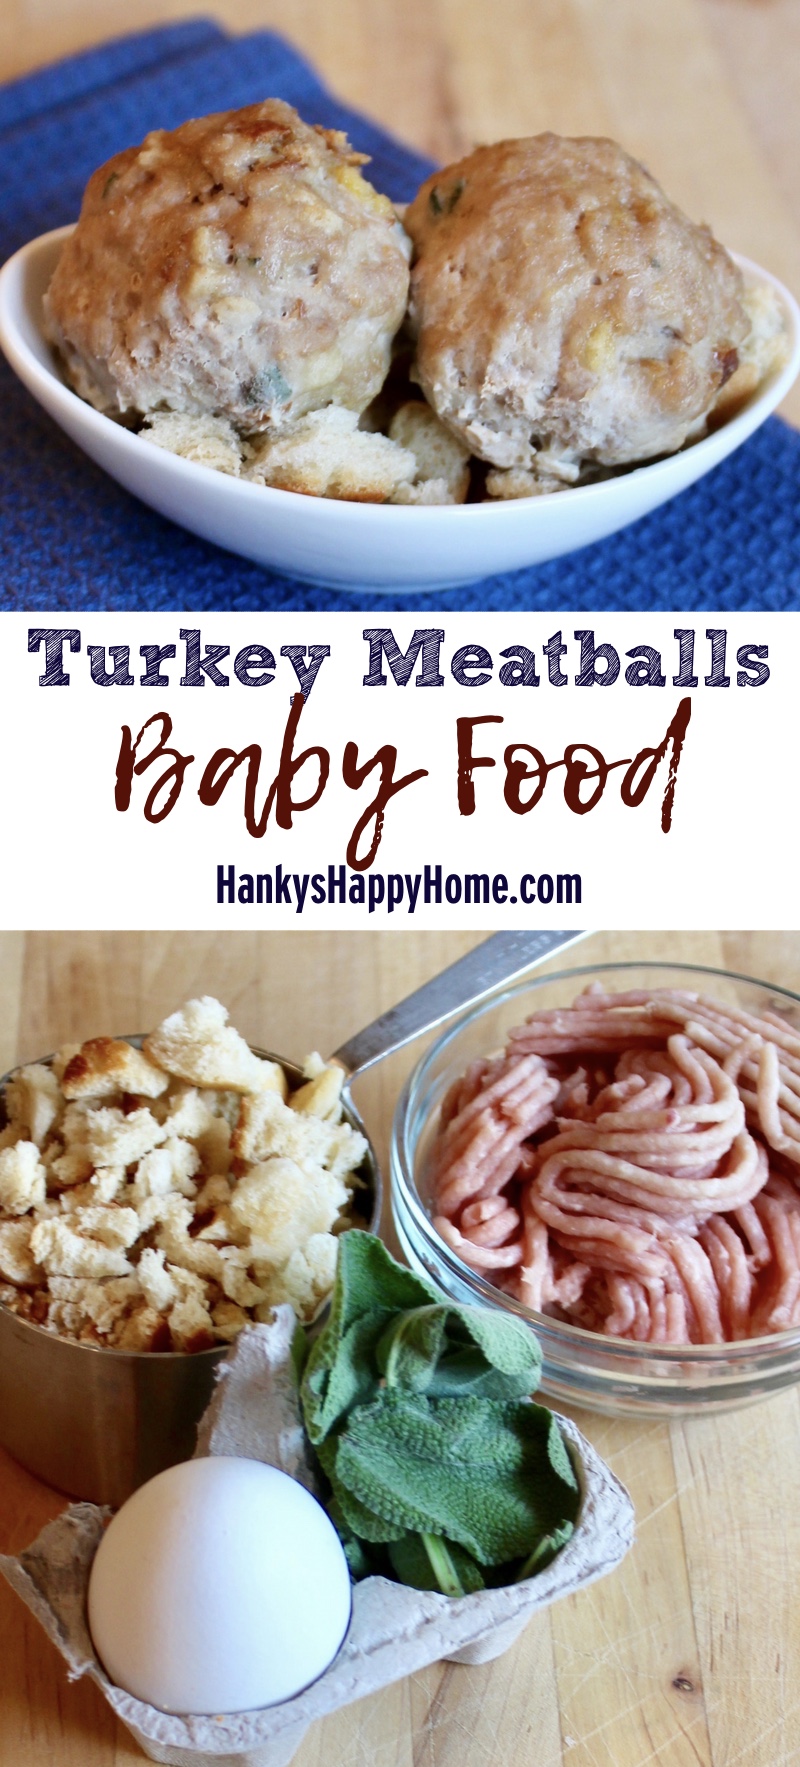 These Turkey Meatballs for baby are packed with protein. A perfect finger food for baby or a quick snack for hangry parents!